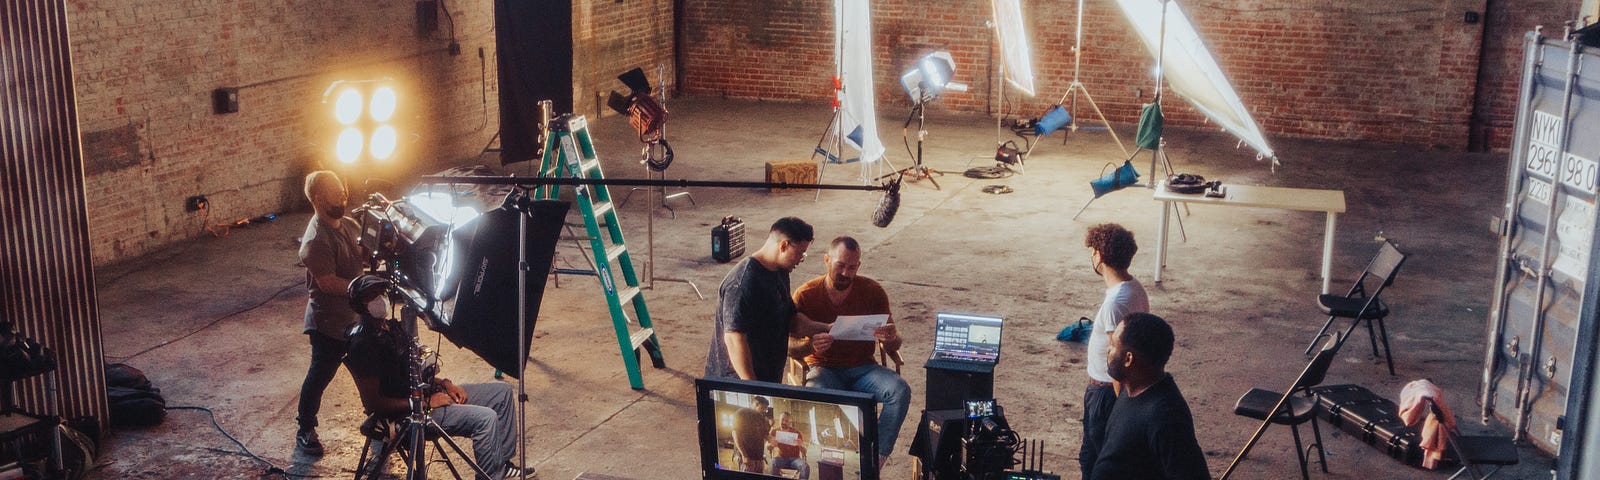 An overhead view of a film crew shooting in a warehouse with windows along one wall.